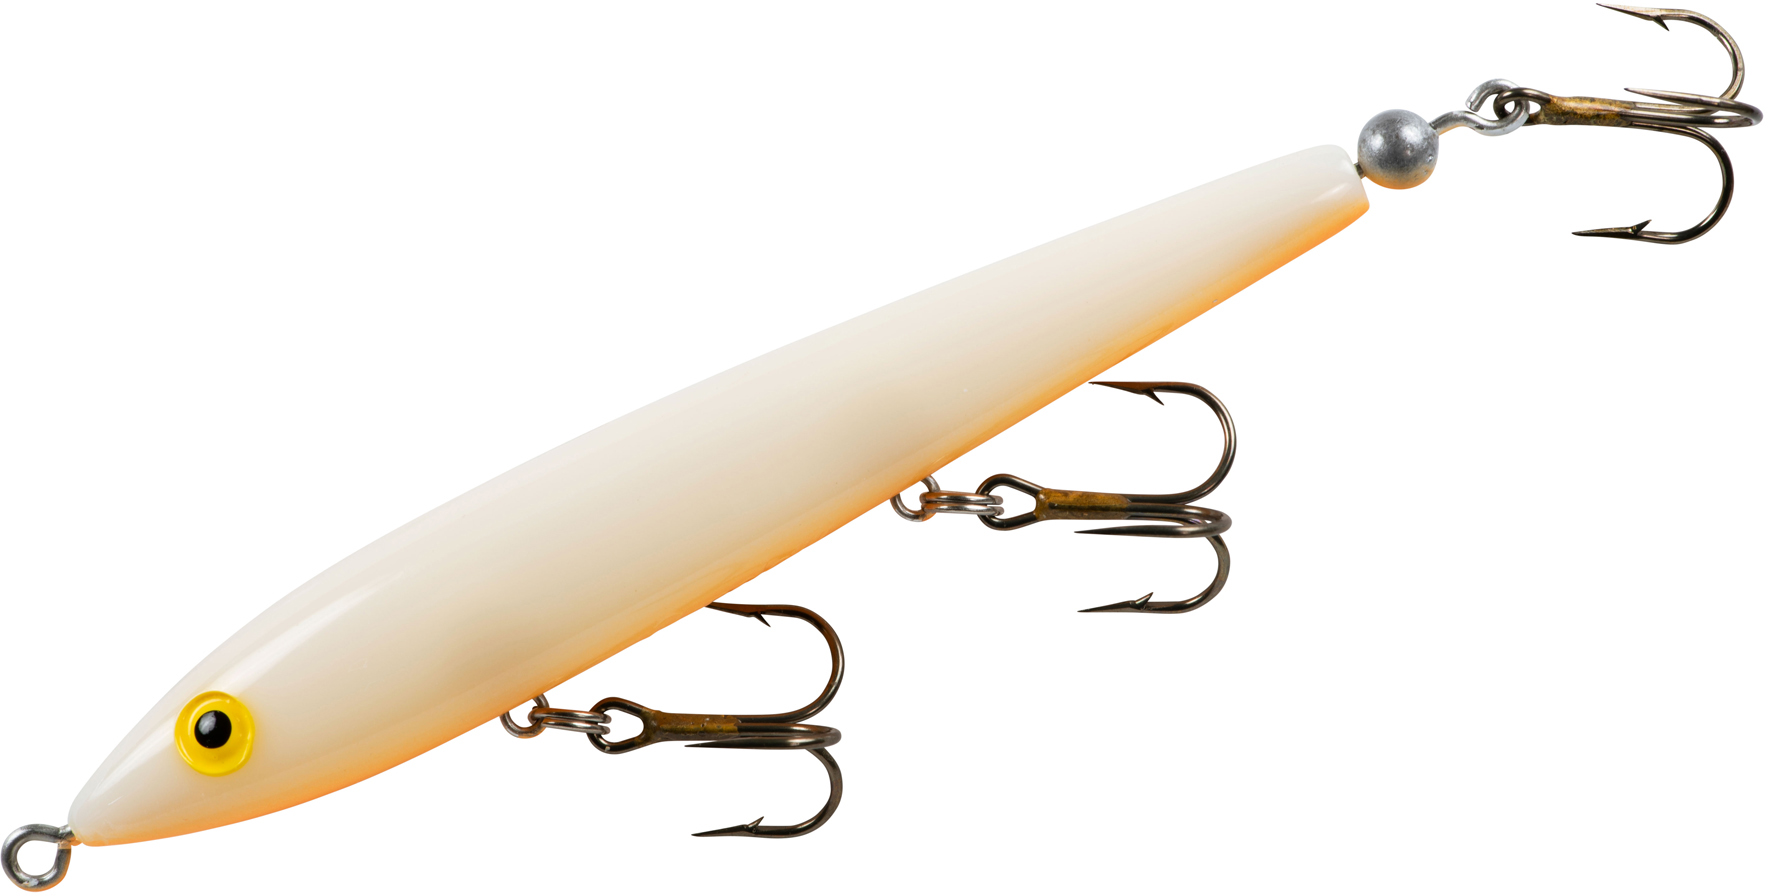 https://op1.0ps.us/original/opplanet-cotton-cordell-tail-weighted-boy-howdy-4-1-2in-3-8oz-4-hooks-bone-orange-c4085-main